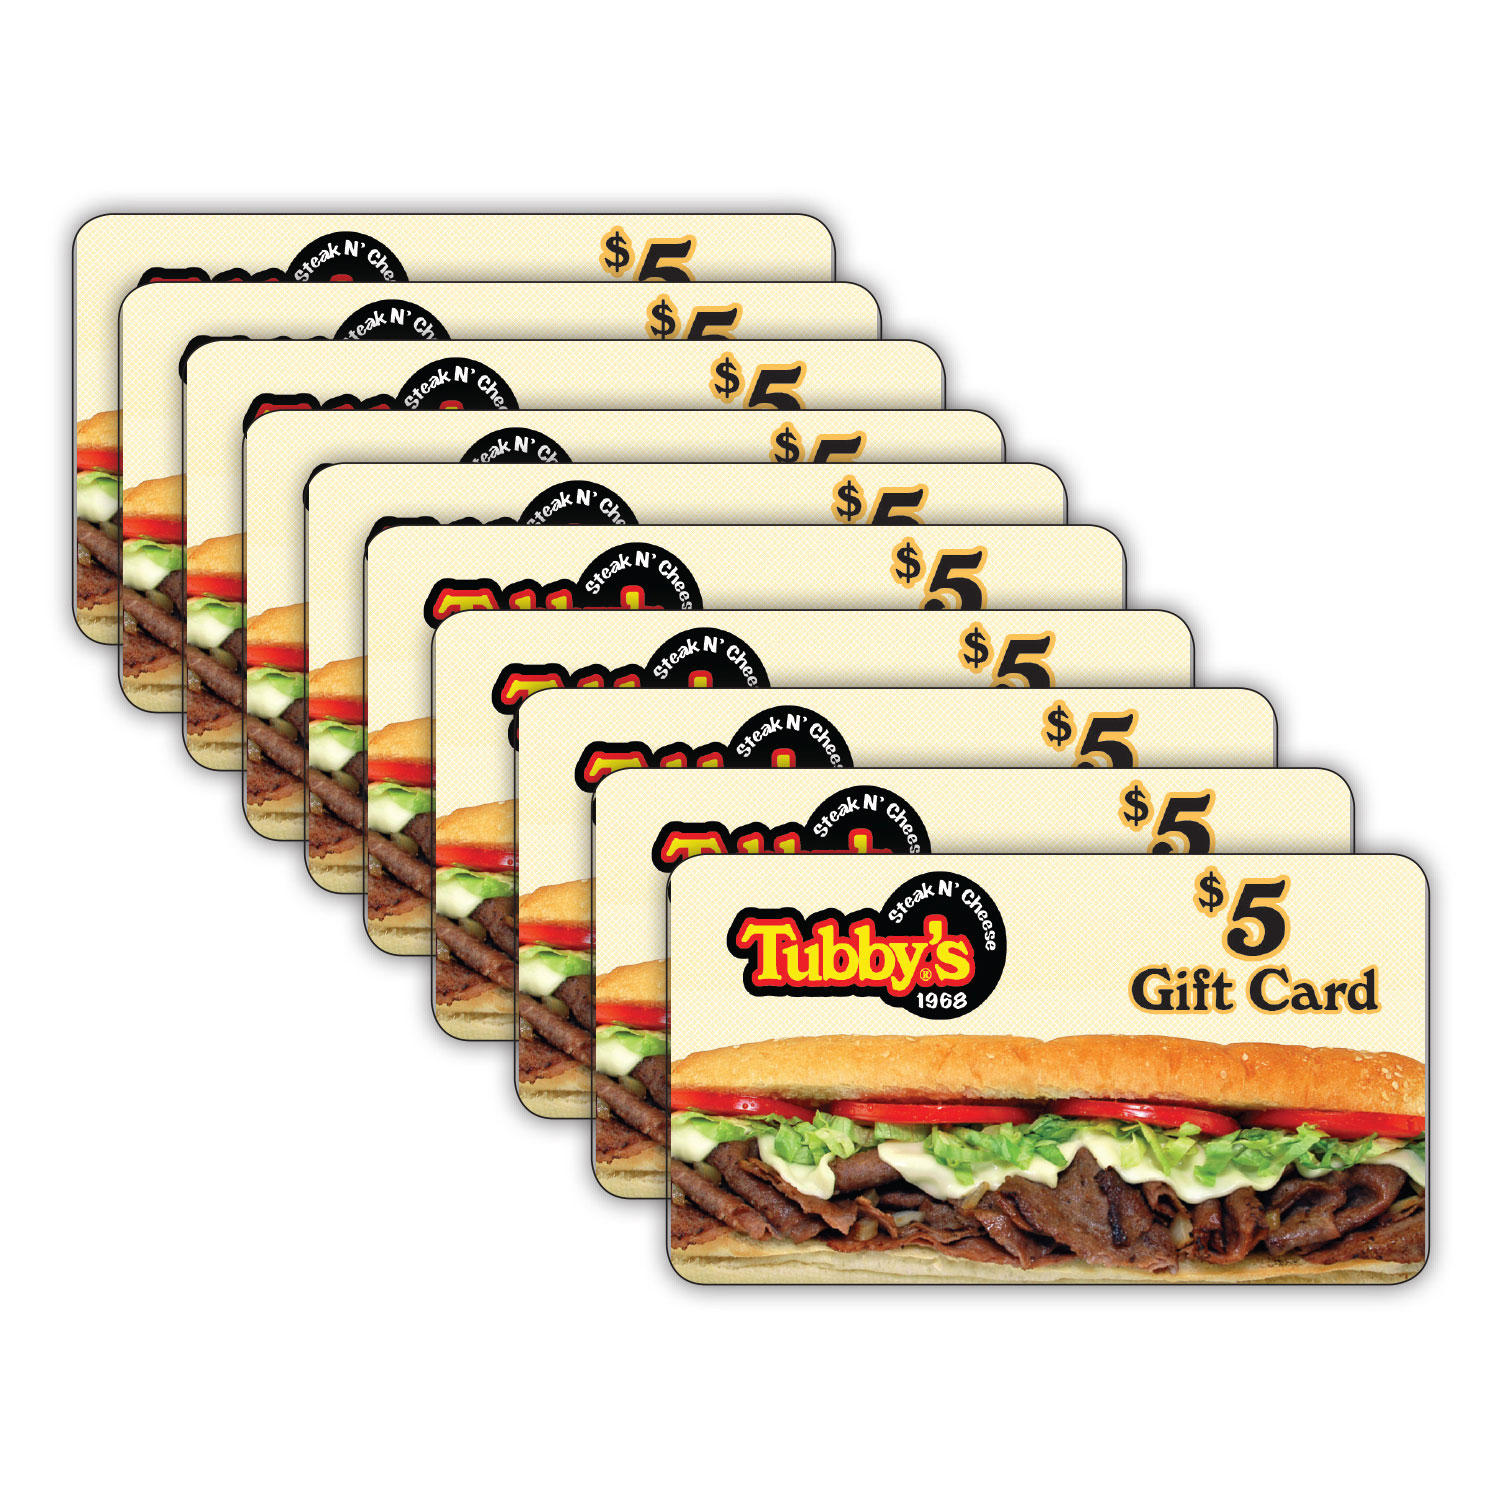 Tubby's Grilled Submarines $50 Multi-Pack - 10/ $5 Gift Cards